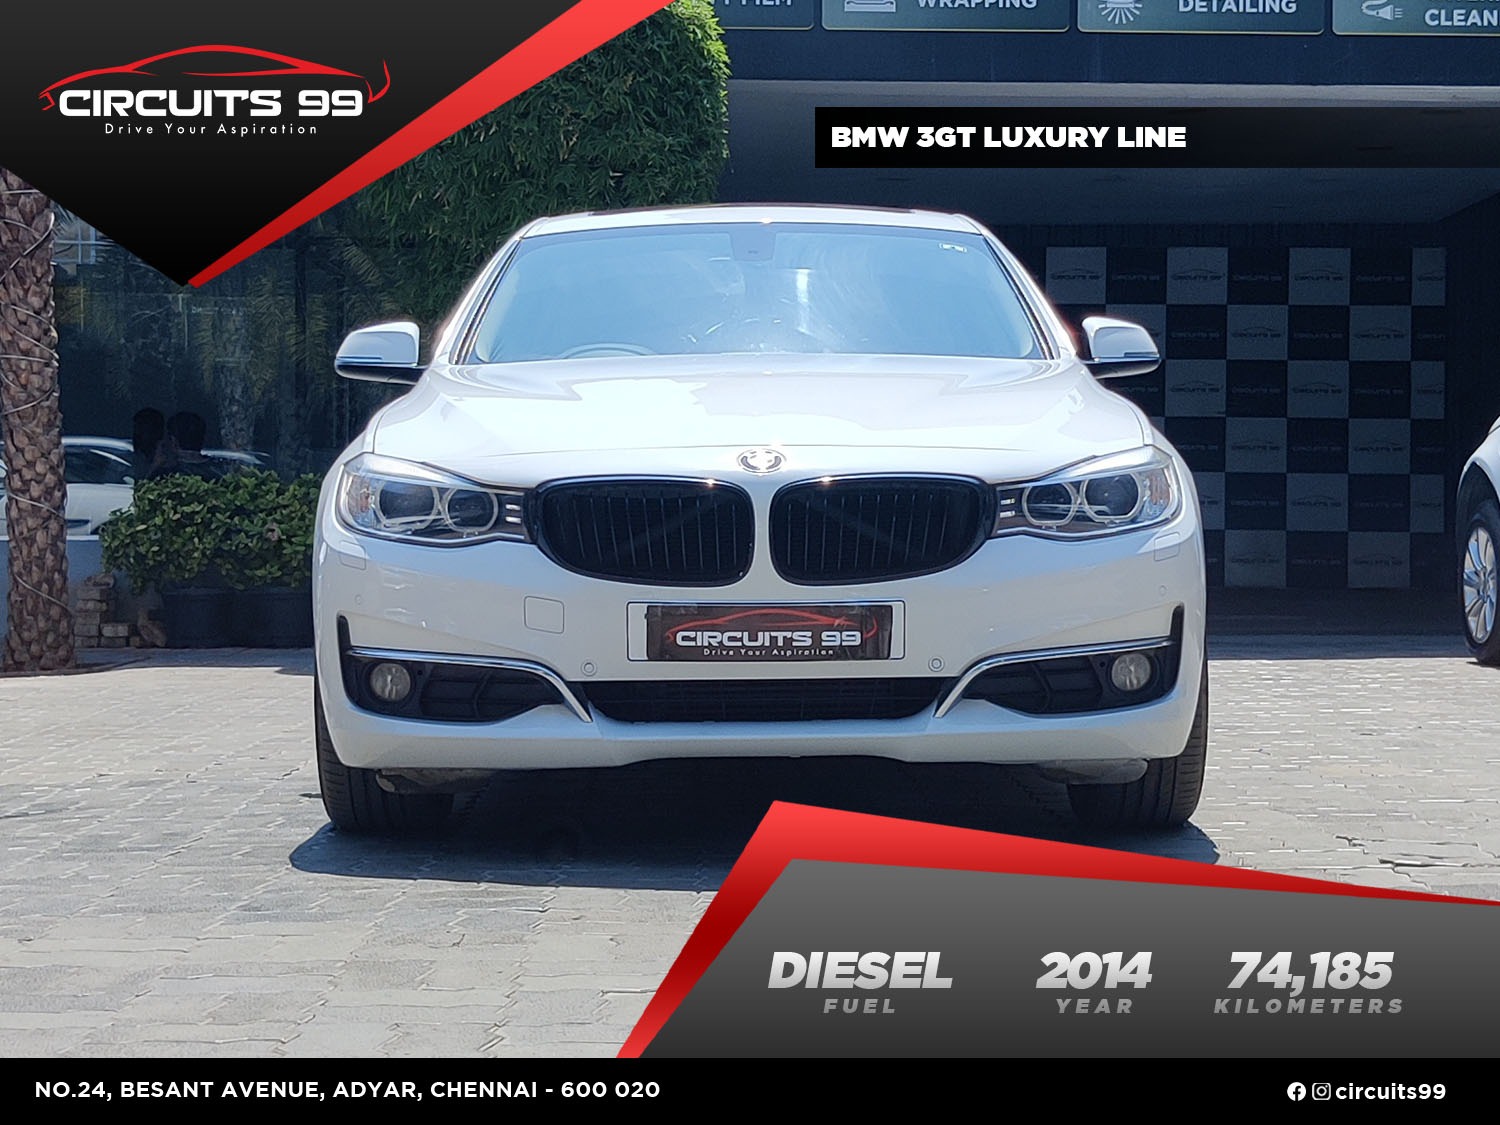 BMW 3GT luxury line Pre-owned car